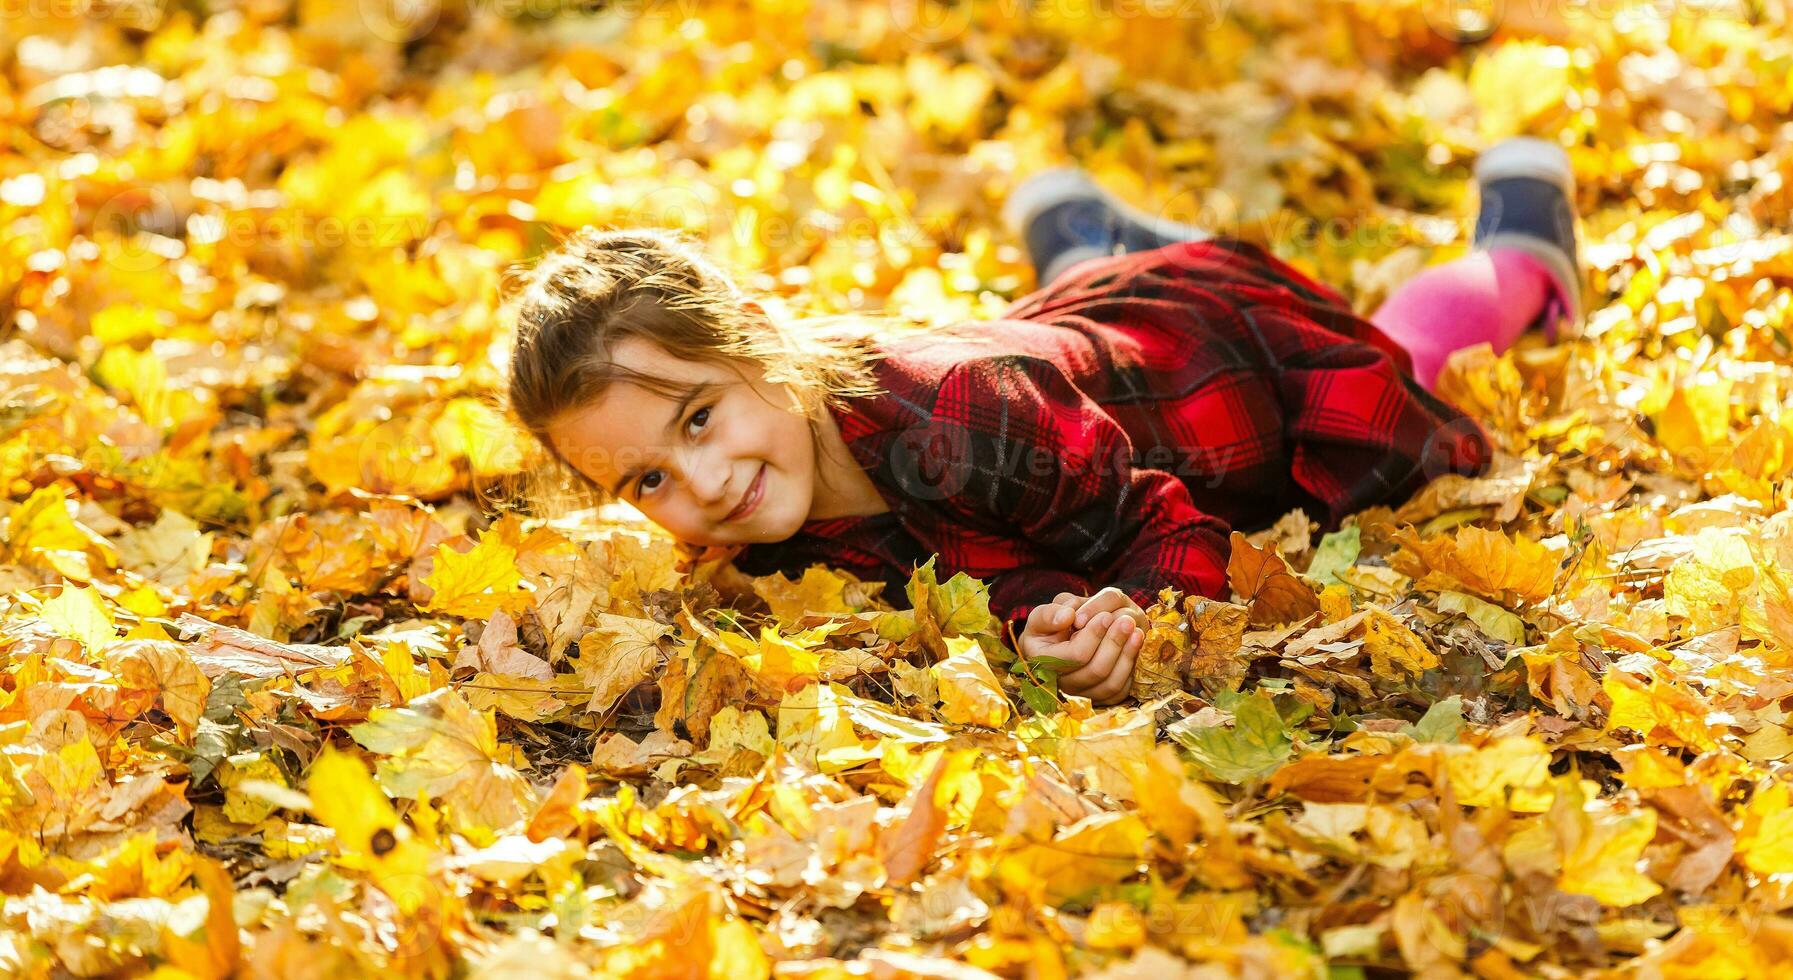 Little girl playing with fallen autumn leaves. photo